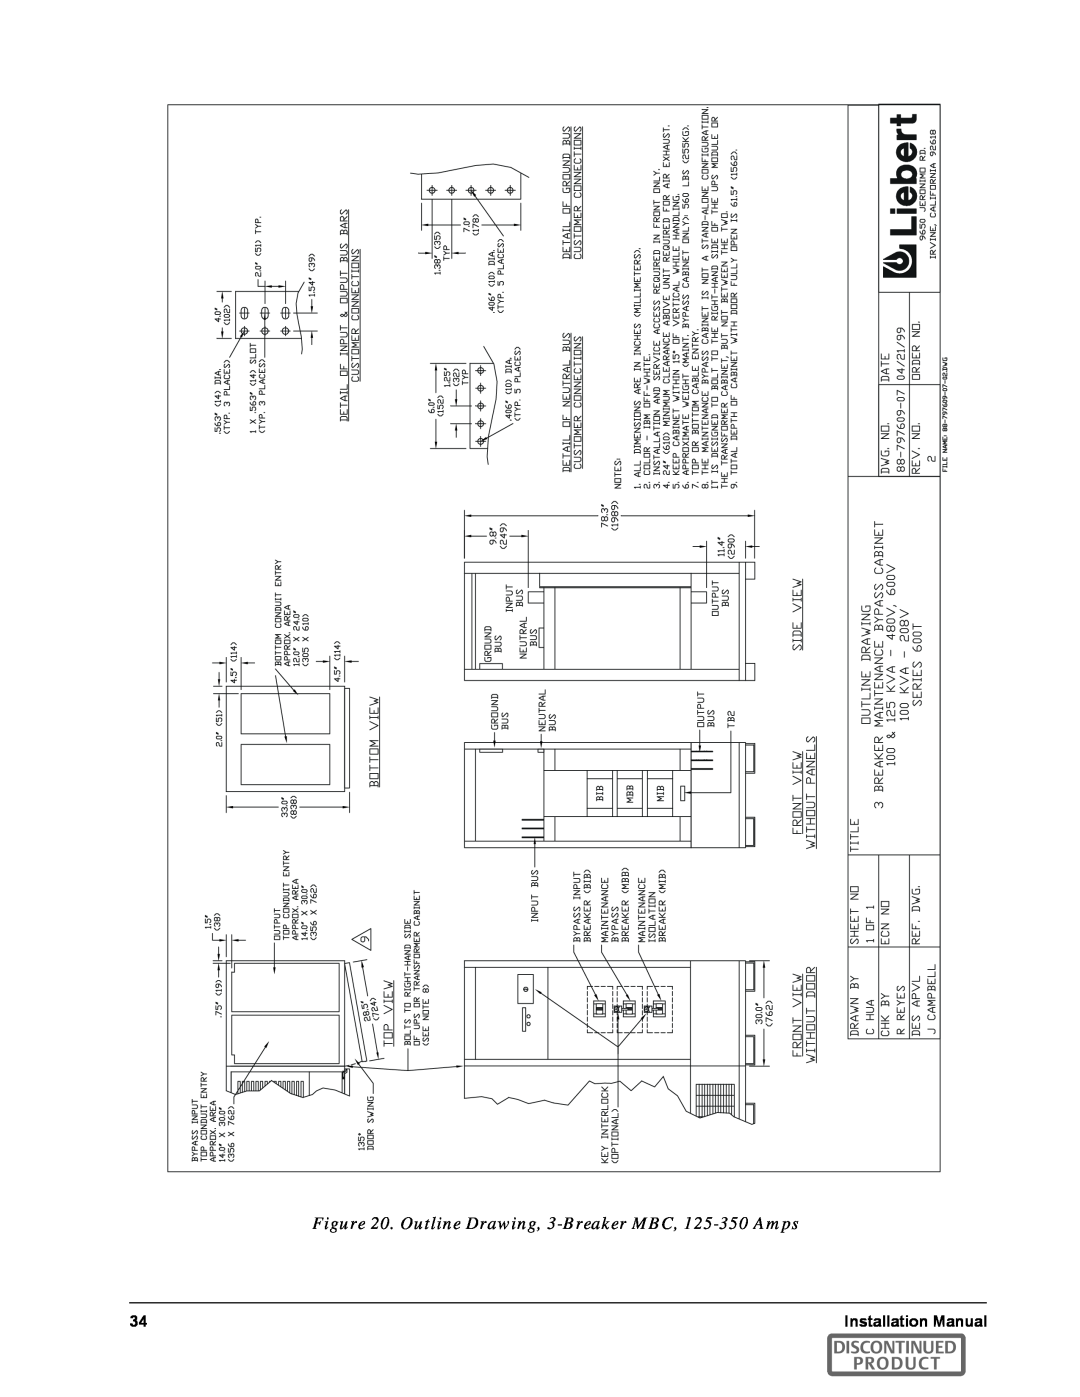 Emerson SERIES 600T manual Outline Drawing, 3-Breaker MBC, 125-350 Amps, Discontinued Product 